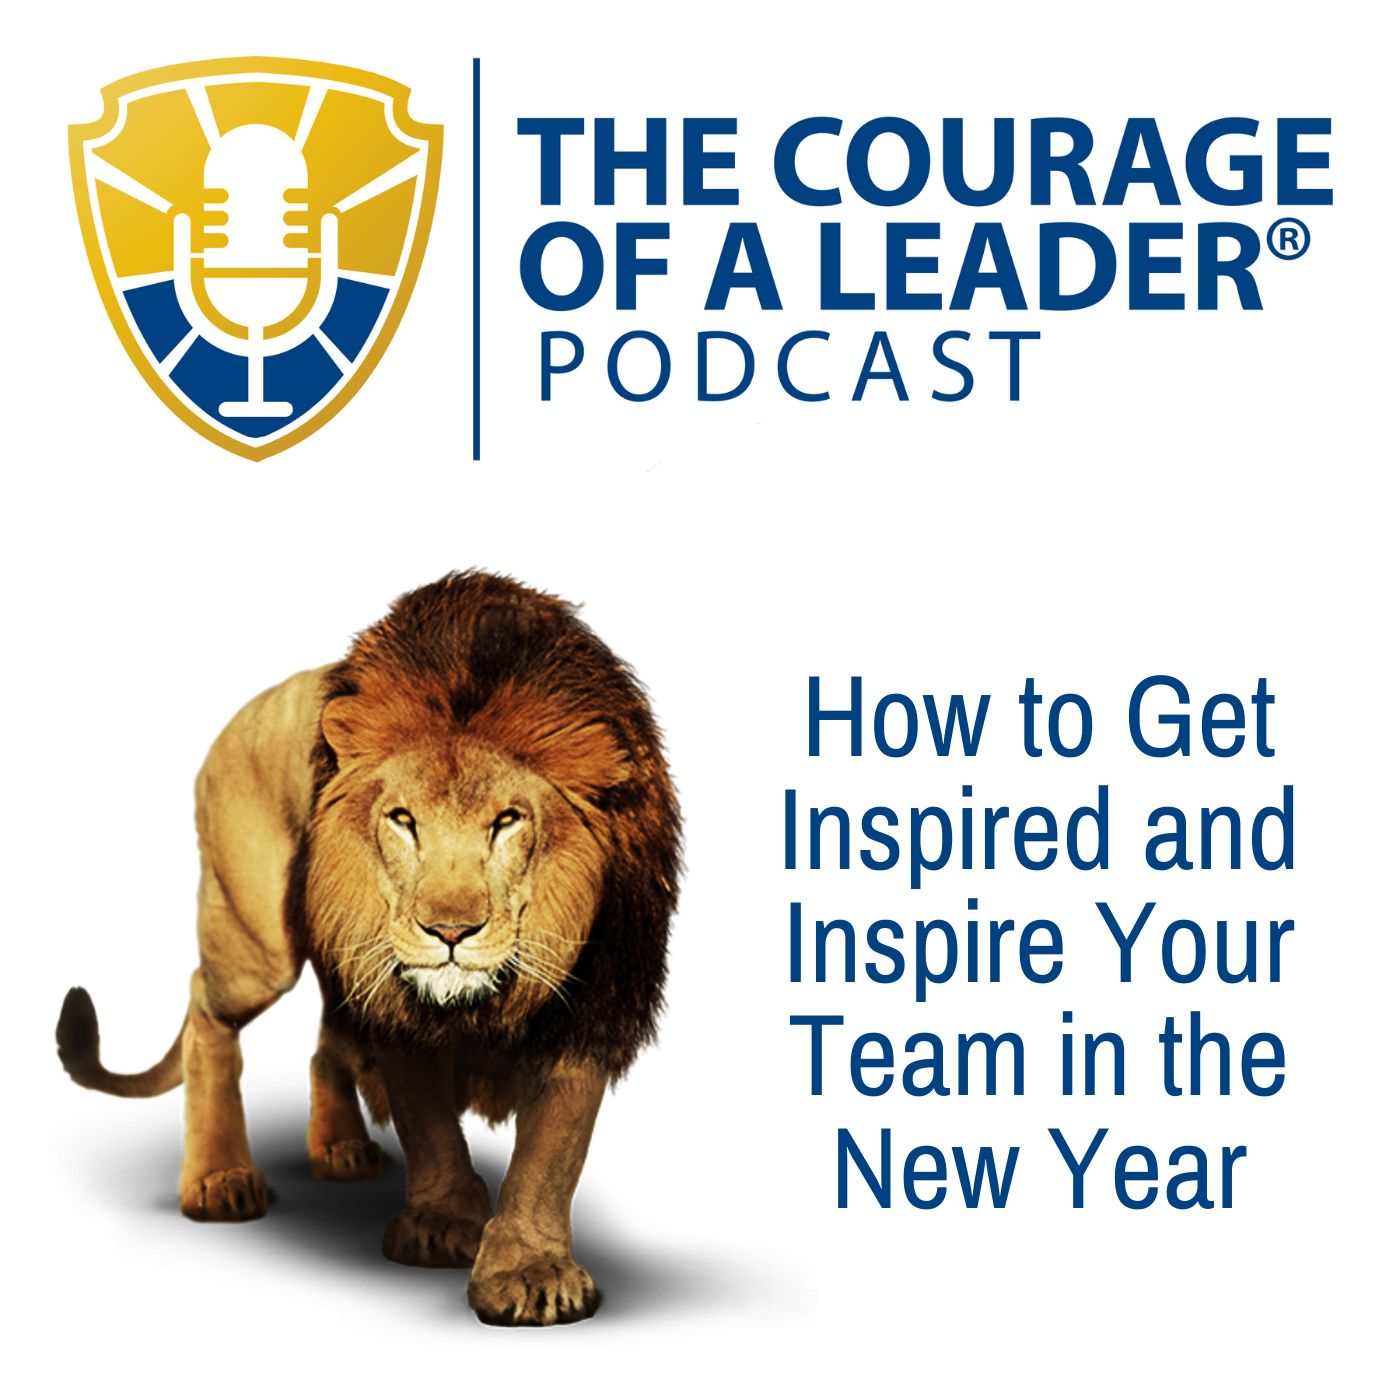 How to Get Inspired and Inspire Your Team in the New Year